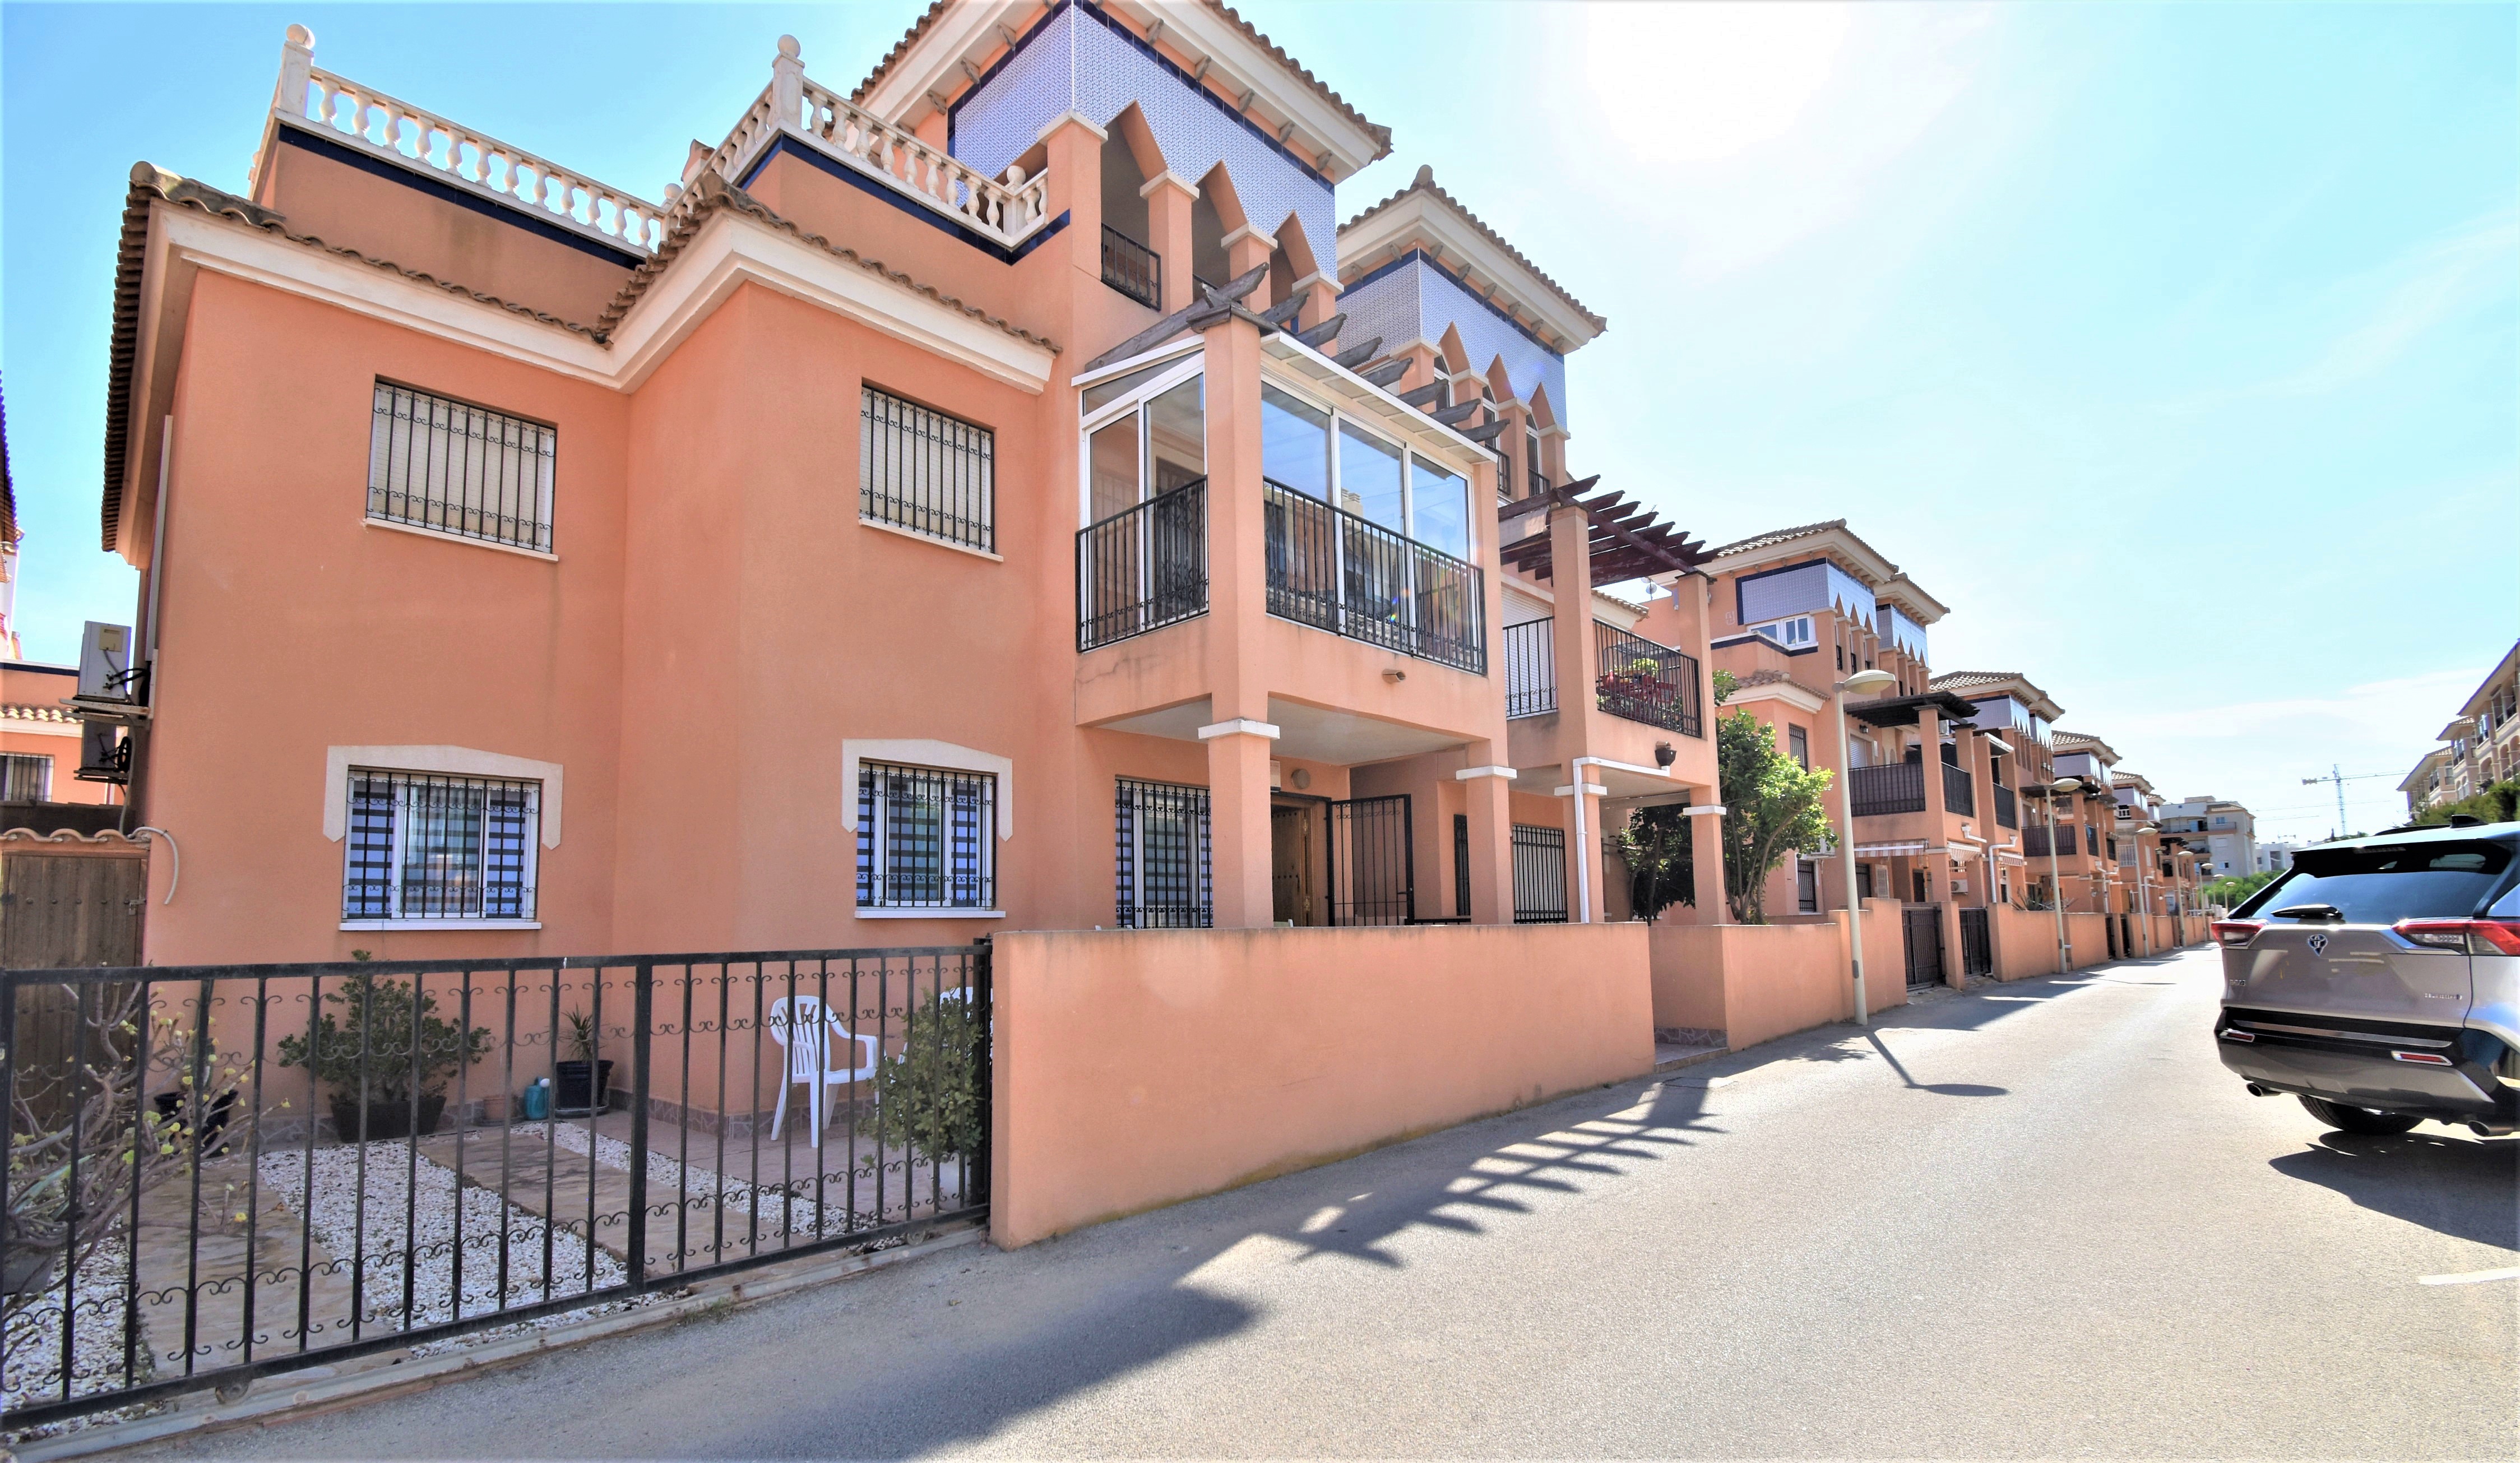 Qlistings - 2 Bedroom Apartment For Sale In Orihuela Costa Property Image